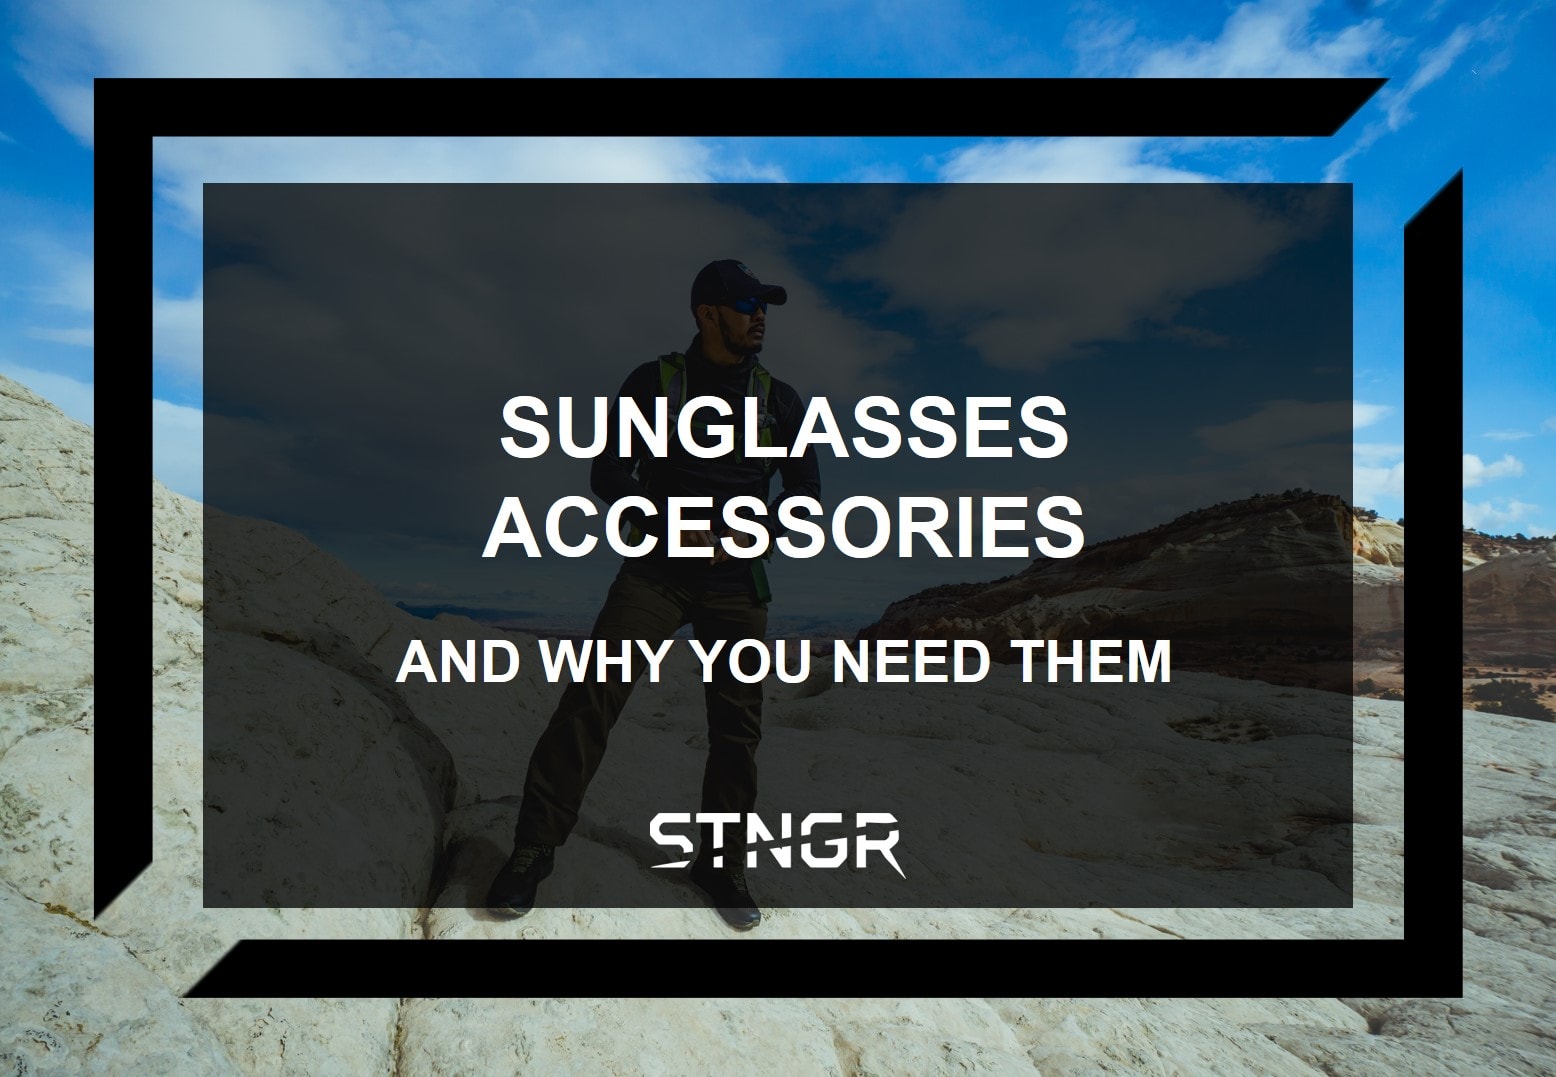 Sunglasses Accessories and Why You Need Them